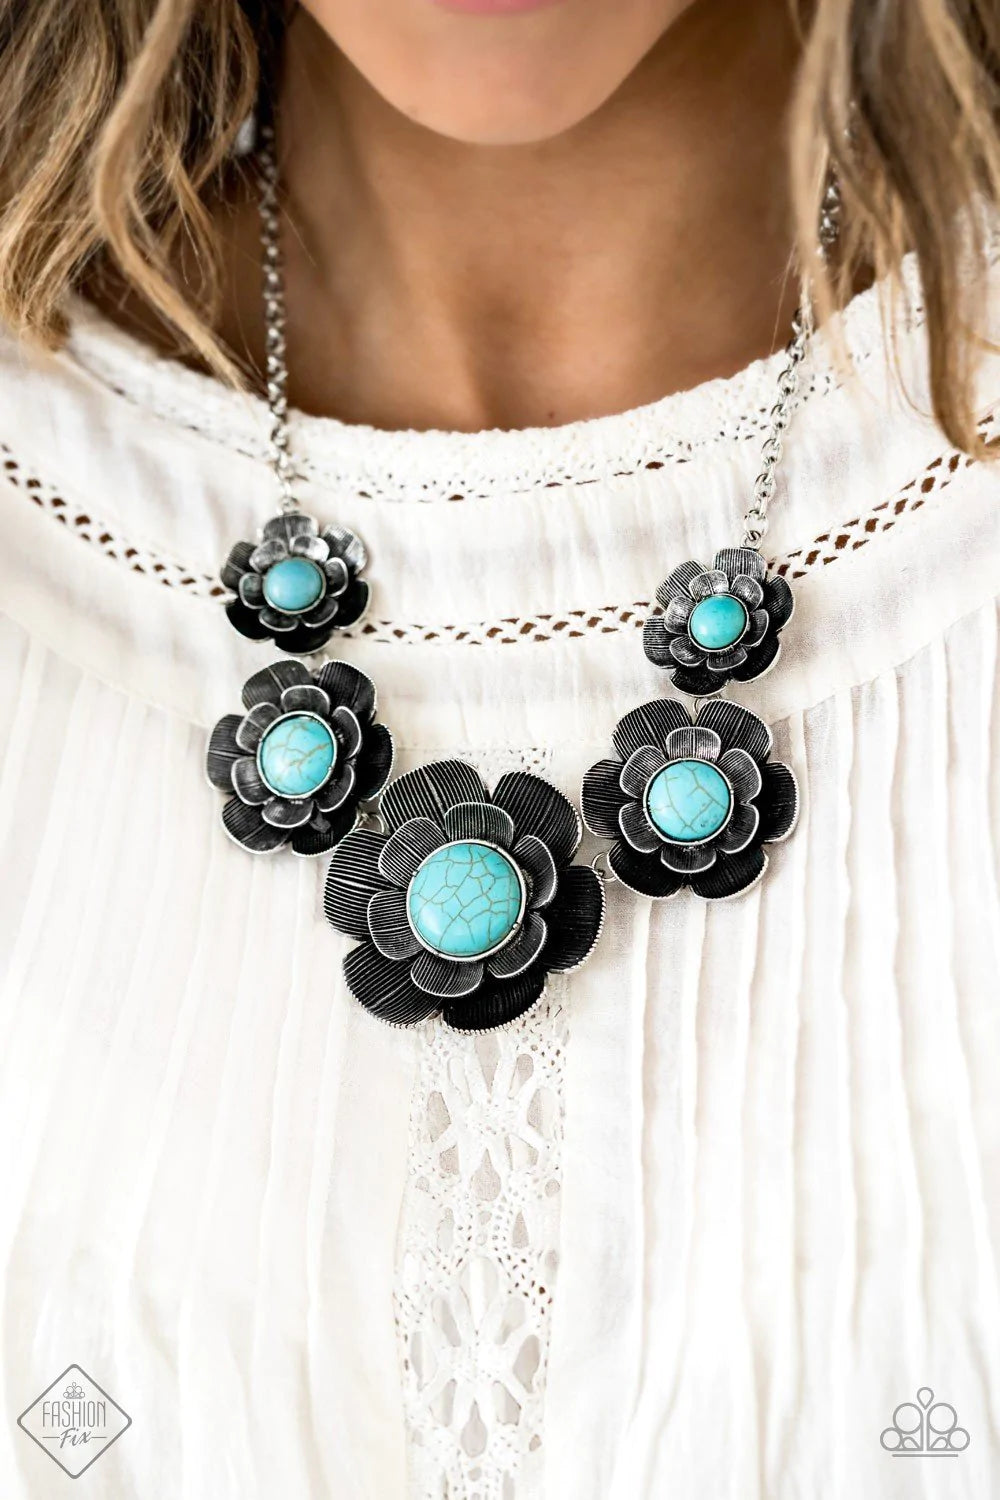 Paparazzi Simply Santa Fe - July's Fashion Fix 2021 Complete Trend Blend - A Finishing Touch Jewelry